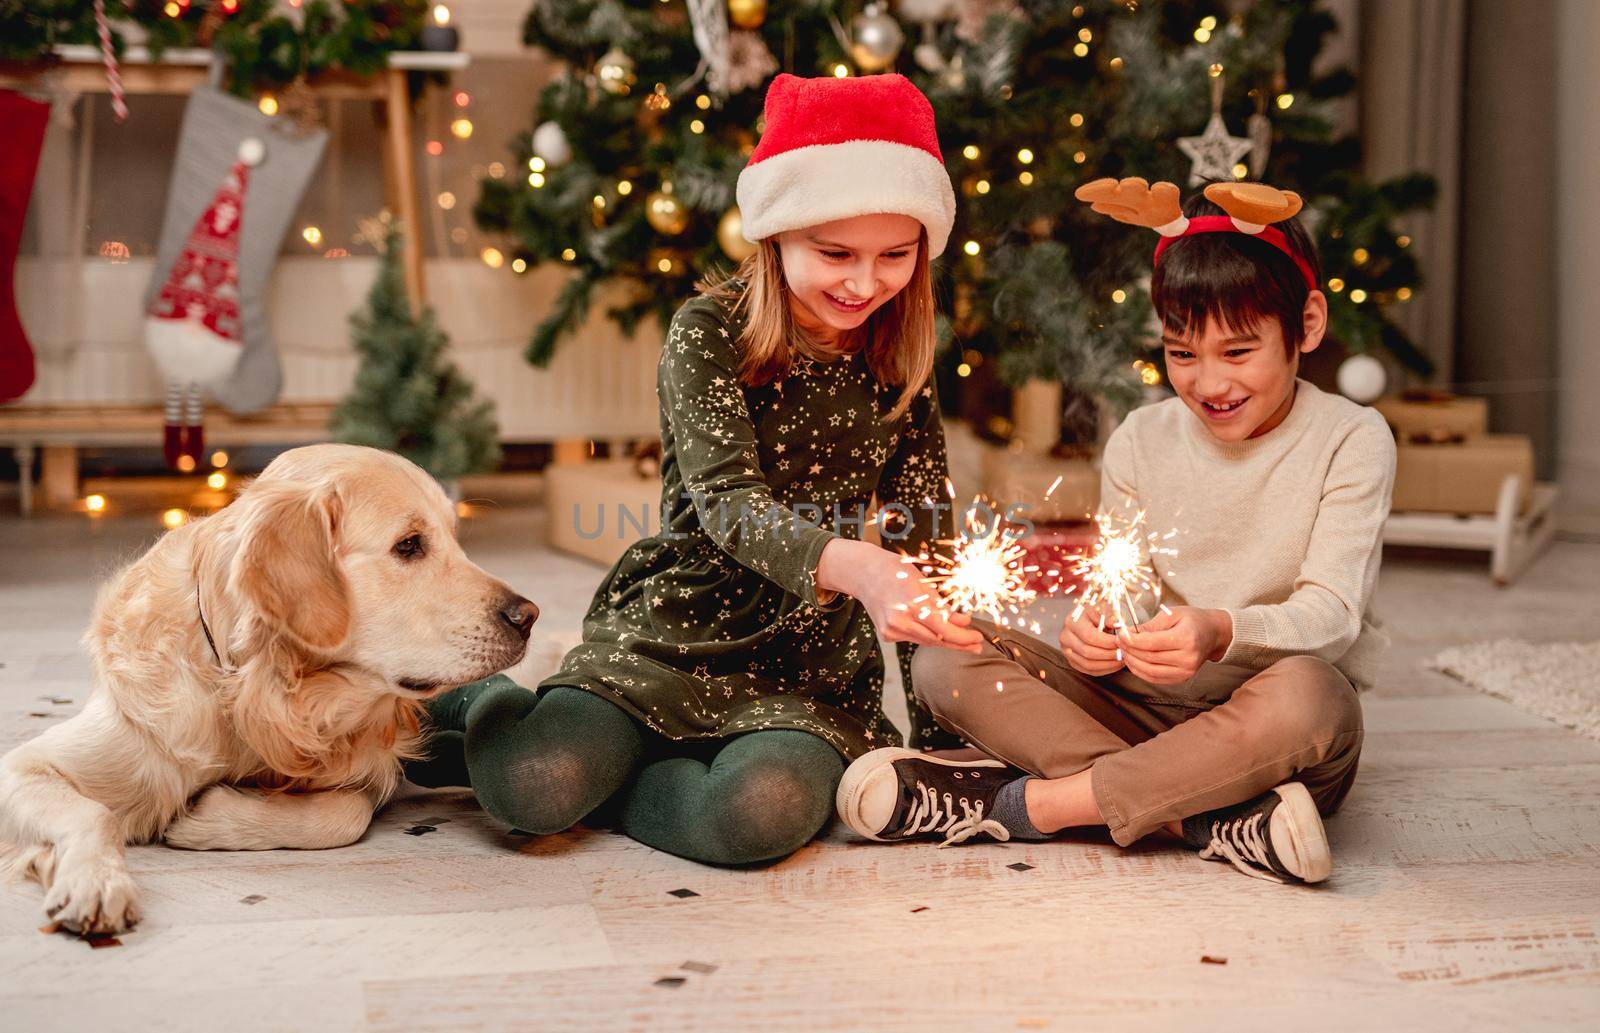 Little girl in santa hat and boy wearing reindeer horns rim holding sparklers while sitting beside golden retriever dog at home